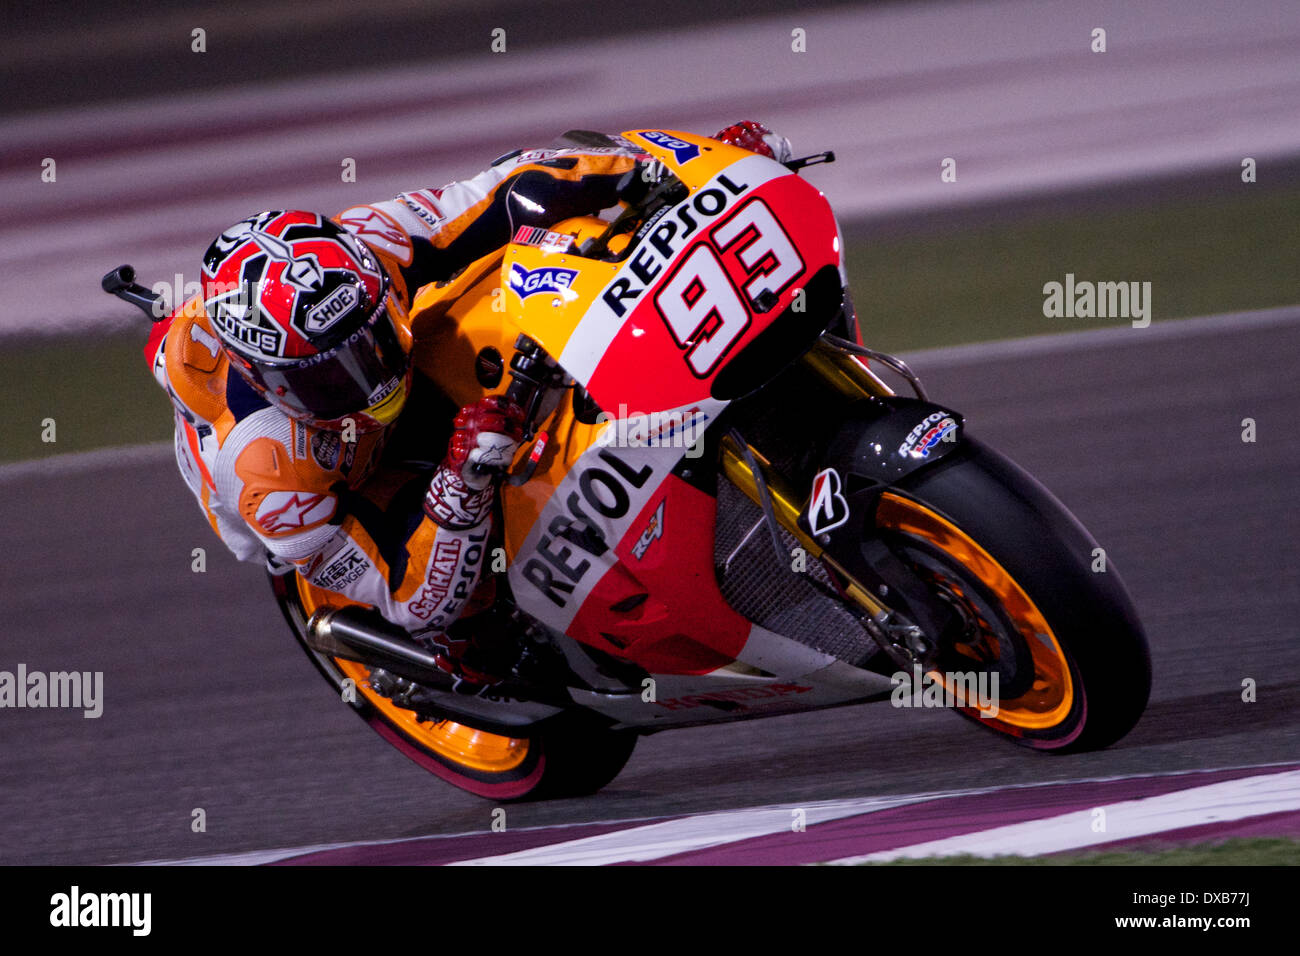 Losail Race Track, Qatar. 22nd March 2014. Marc Marquez took pole position  riding his Repsol Honda MotoGP bike during the Qualifying session for the  first round of the 2014 FIM MotoGP World